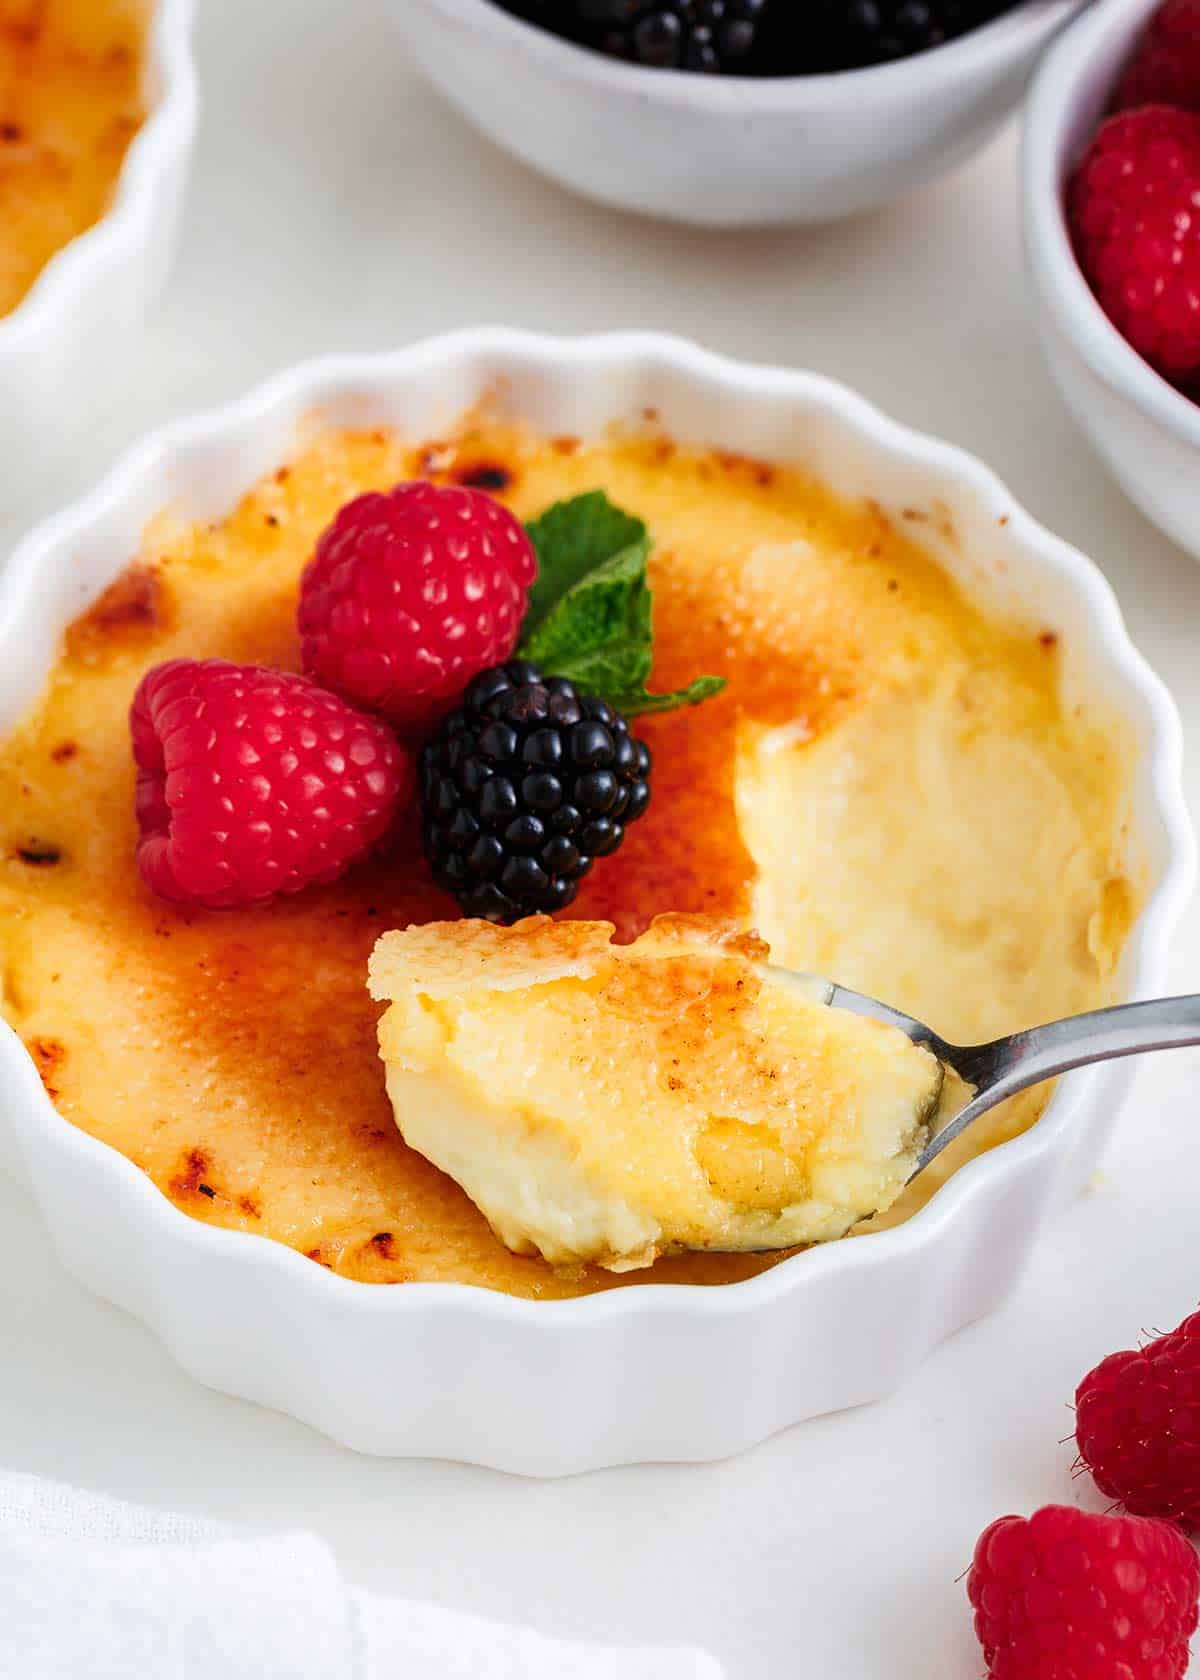 Spoonful of creme brulee.